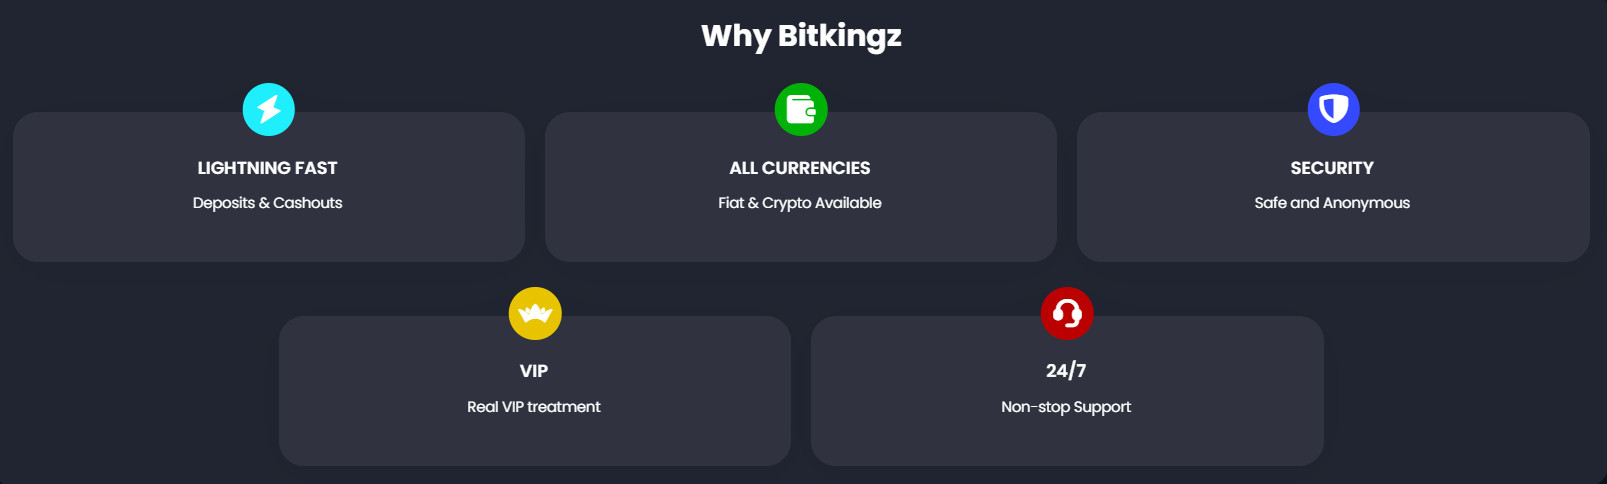 Why Bitkings